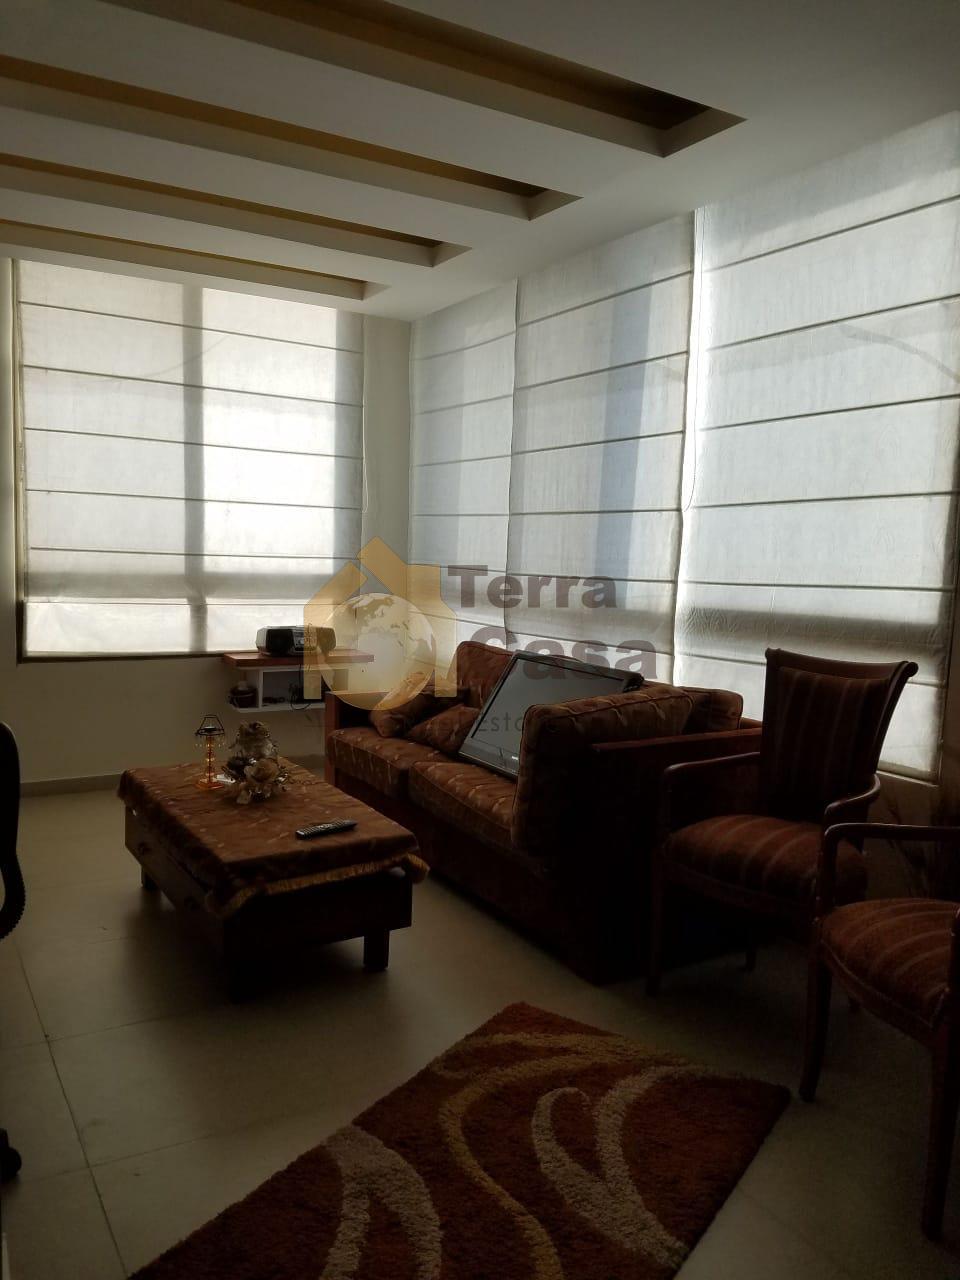 Apartment for sale in hboub